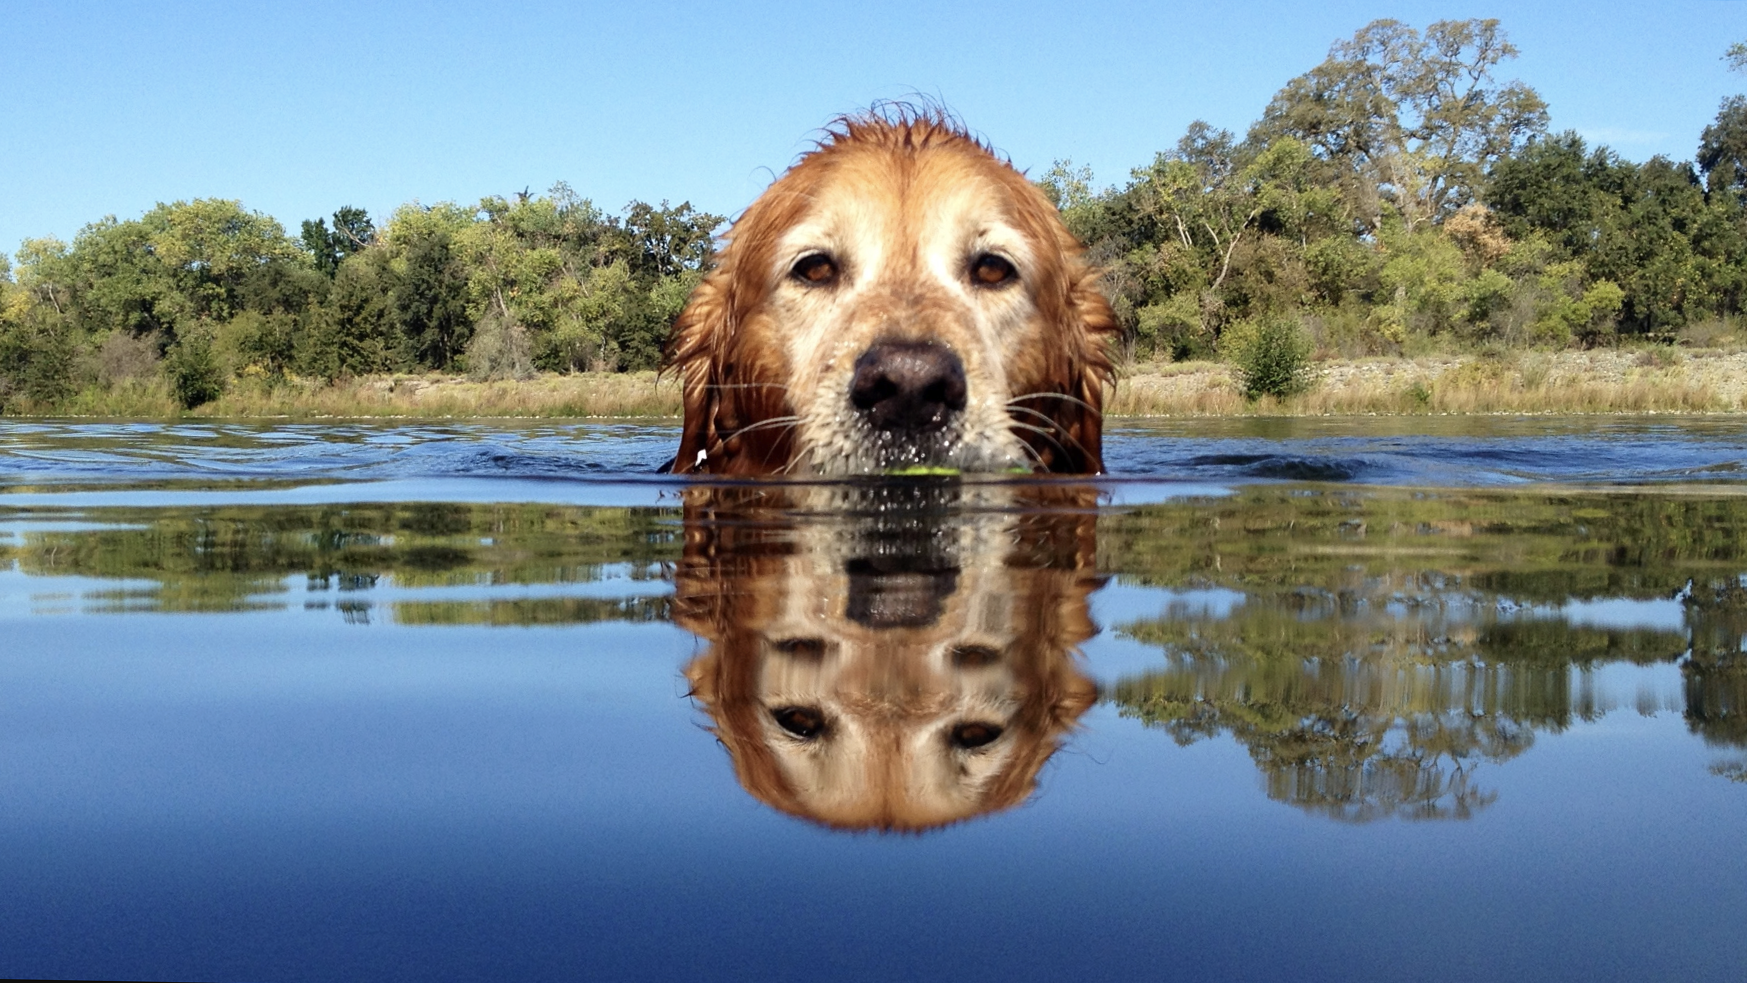 A golden retriever swims in a serene lake along the Sacramento trails. Only its head breaks the water's surface, the reflection uncannily sharp. Trees and a bright, blue sky form the backdrop.